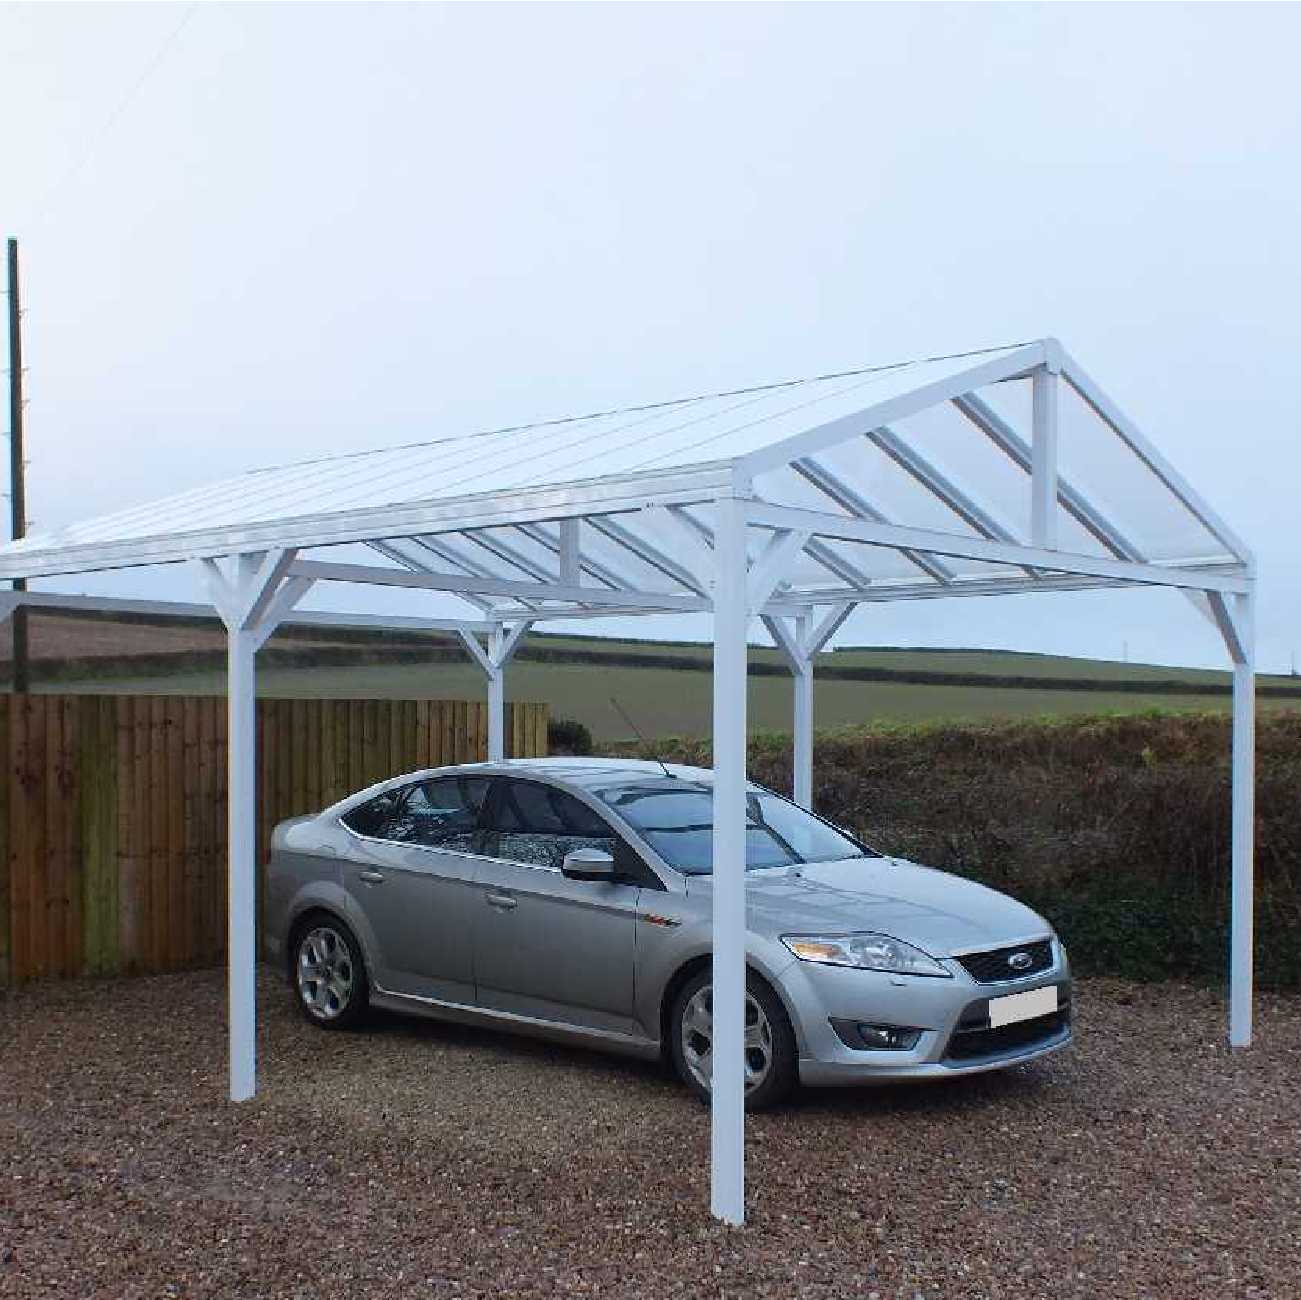 Affordable Omega Smart Free-Standing, White Gable-Roof (type 1) Canopy with 16mm Polycarbonate Glazing - 6.3m (W) x 4.0m (P), (8) Supporting Posts